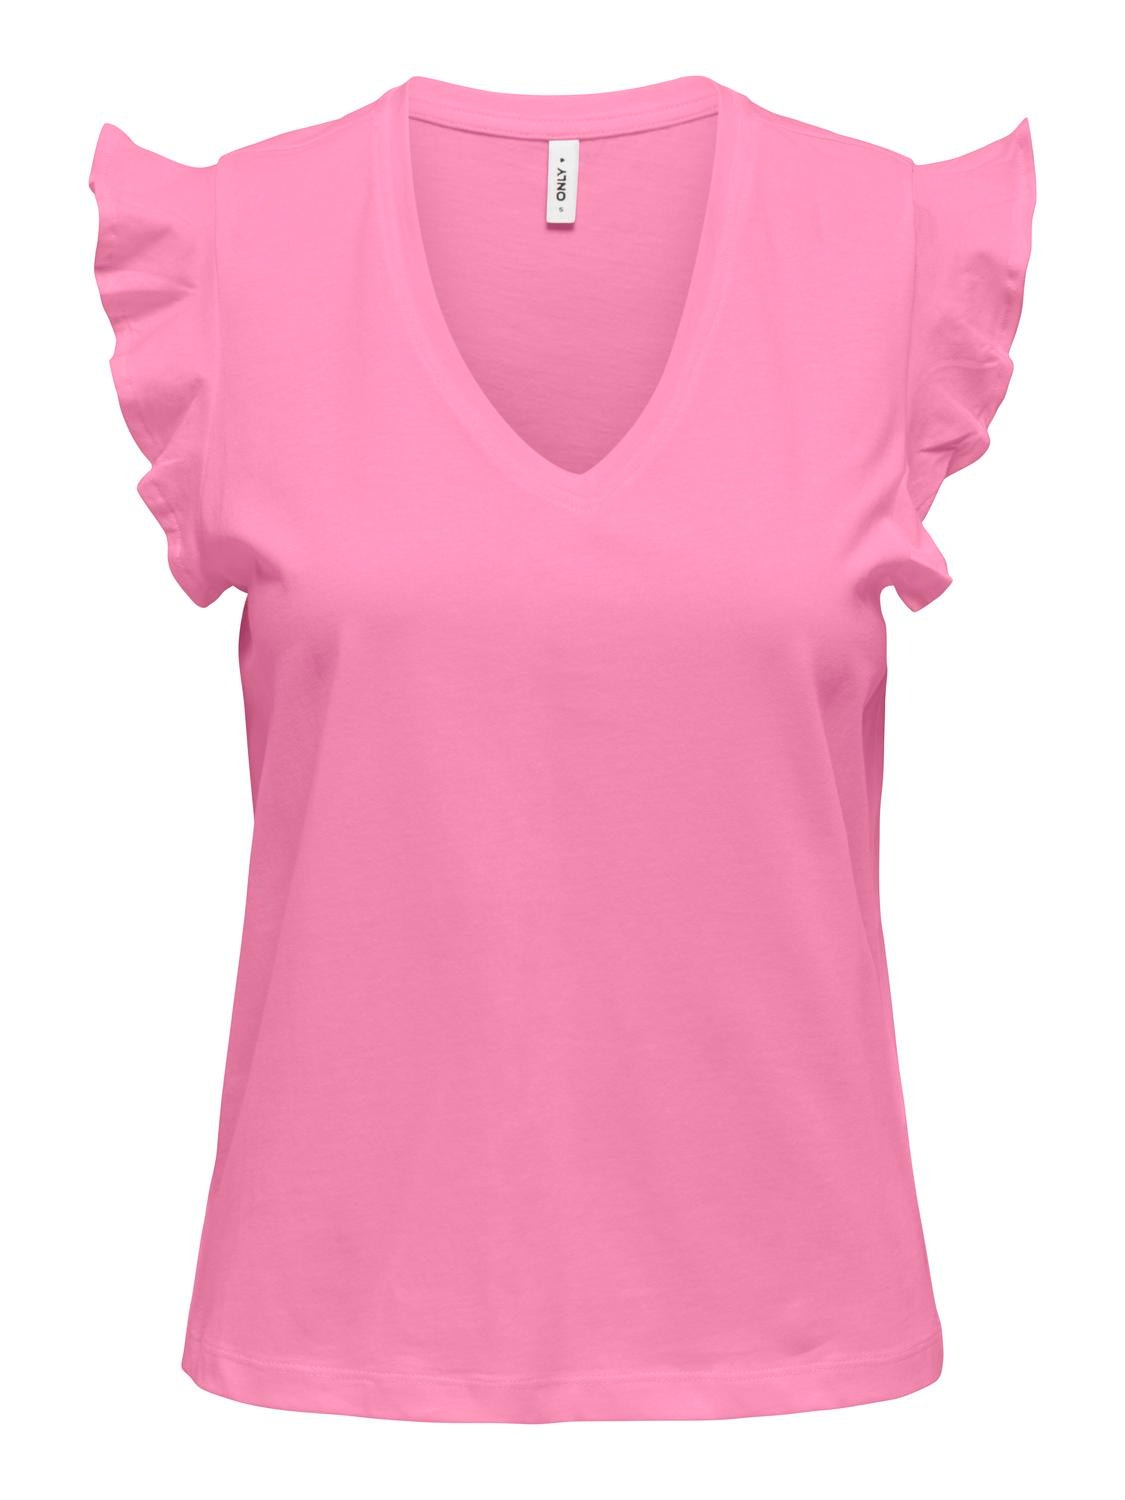 ONLY V-neck Ruffle Top -Begonia Pink - 15252469